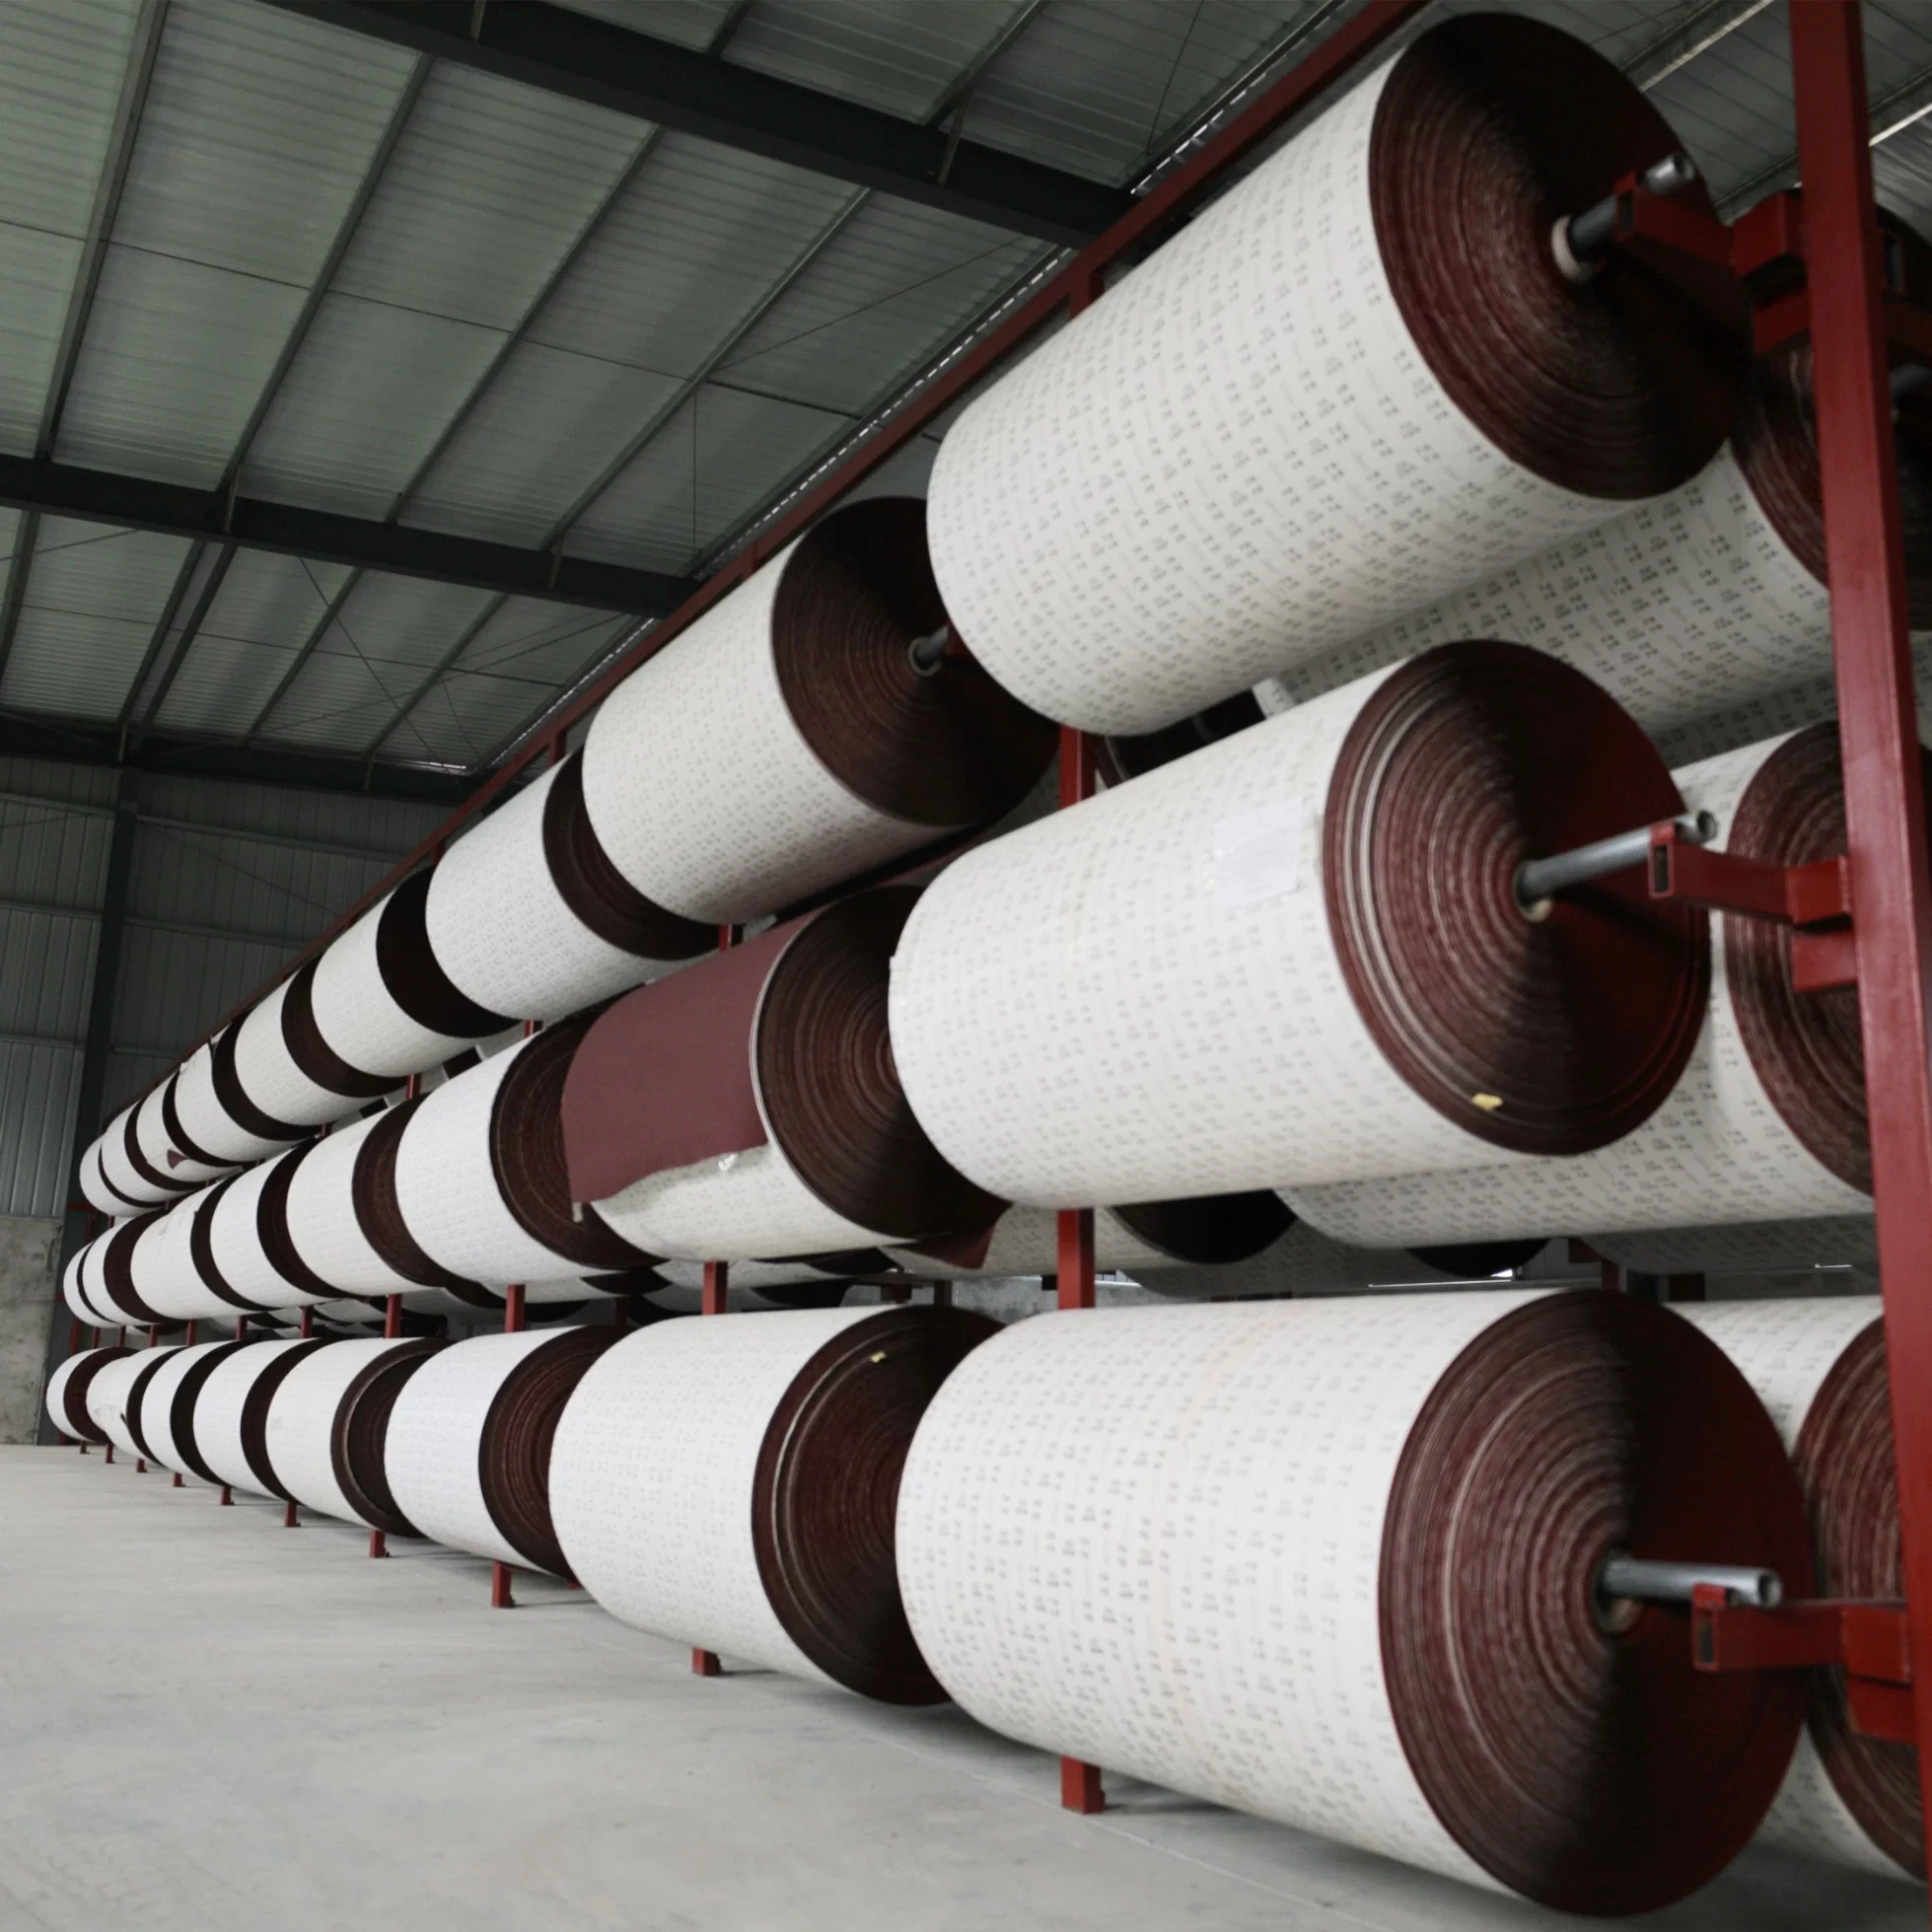 China Factory Red Abrasive Velcro Jumbo Roll Sandpaper Roll Sand Paper Roll Aluminum Oxide Sanding Cloth Roll Wholesale